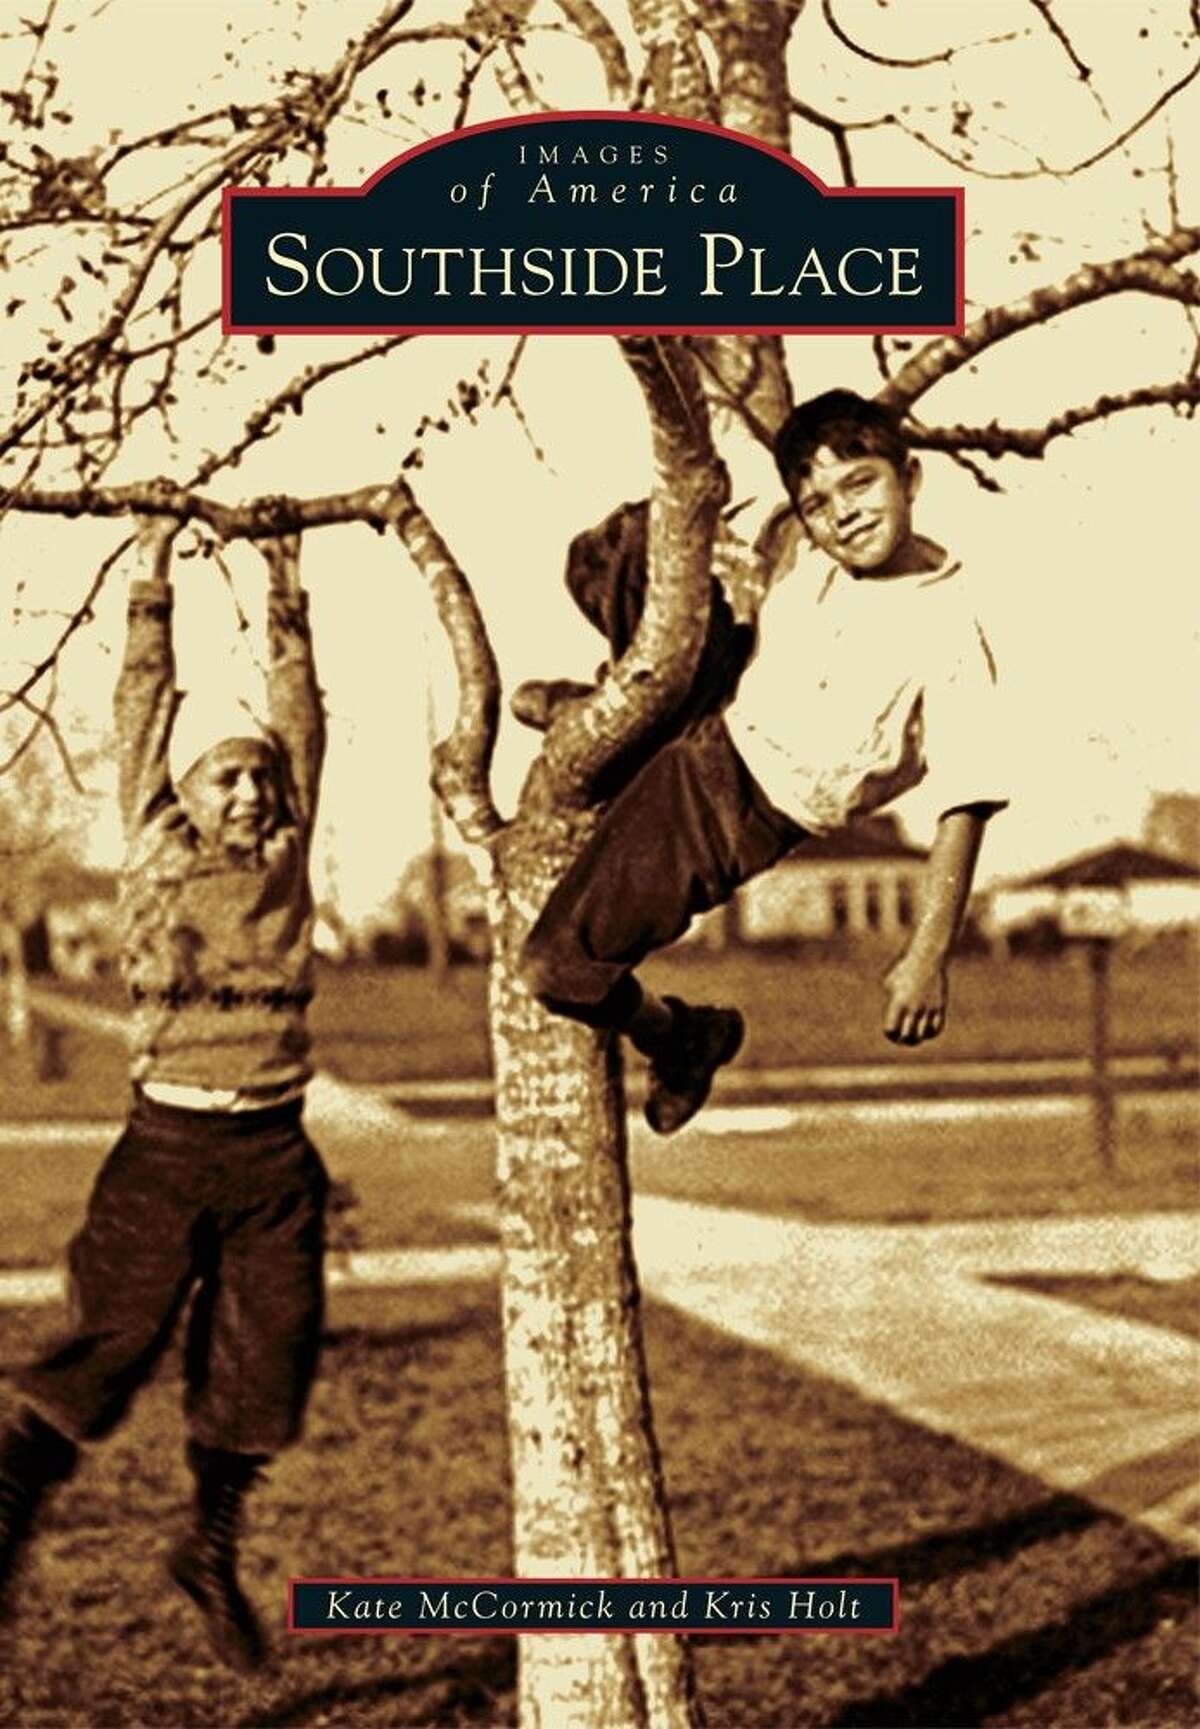 The cover of “Southside Place,” recently released by Arcadia Publishing.